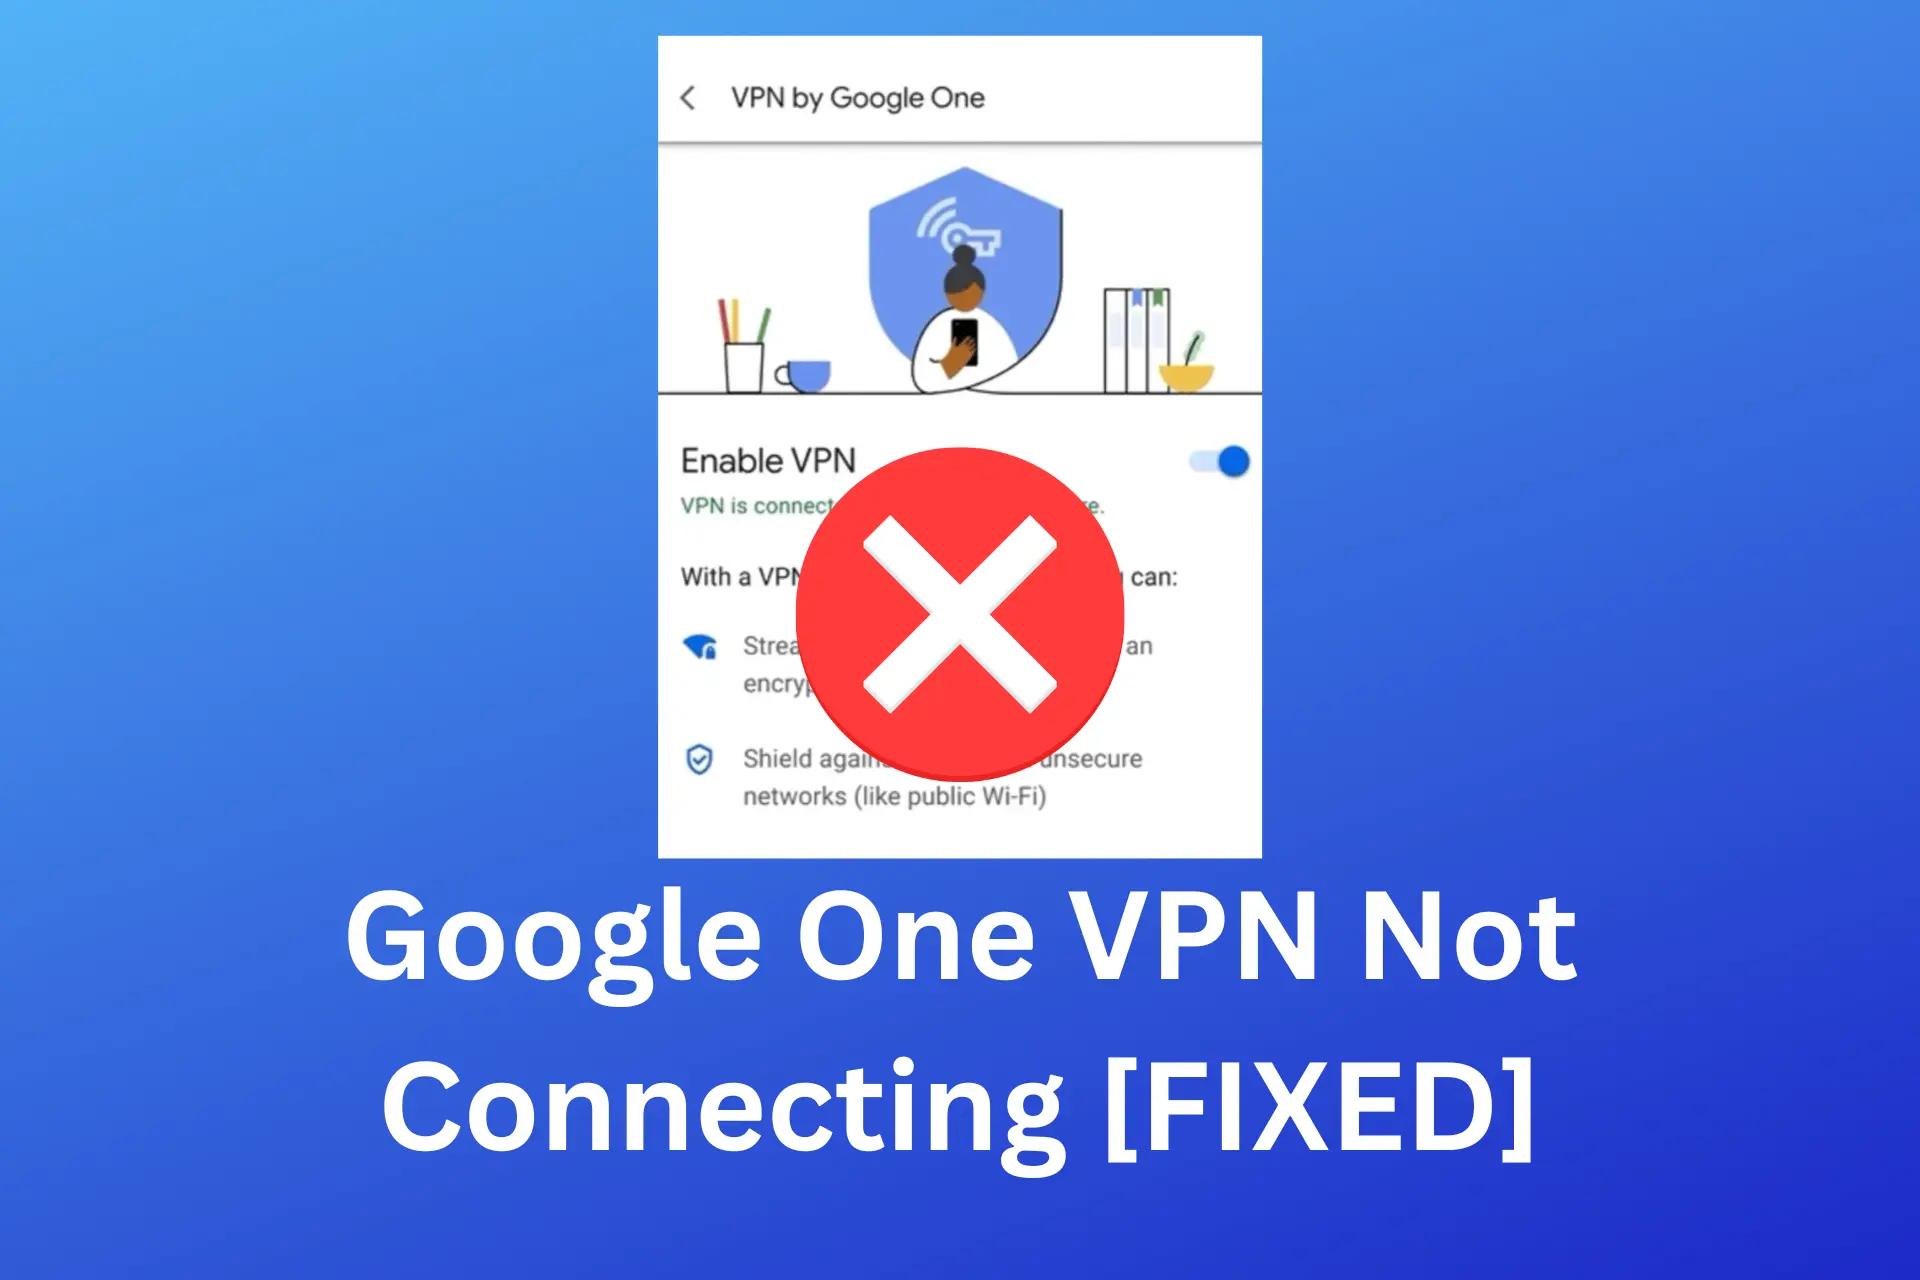 Google One VPN Not Connecting